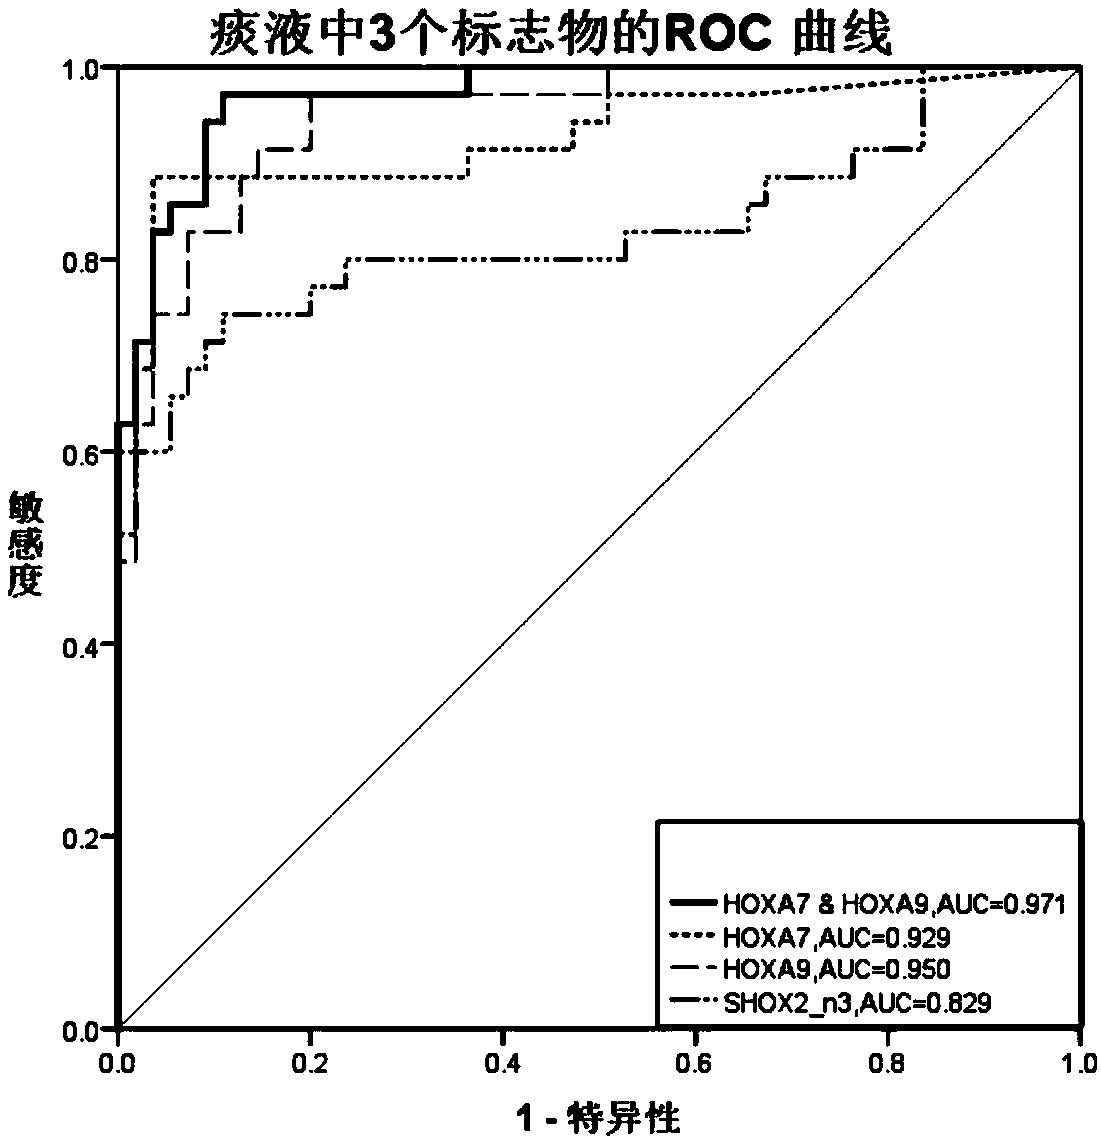 Usage of HOXA7 and HOXA9 methylation detection reagents in preparation of lung cancer diagnostic reagents